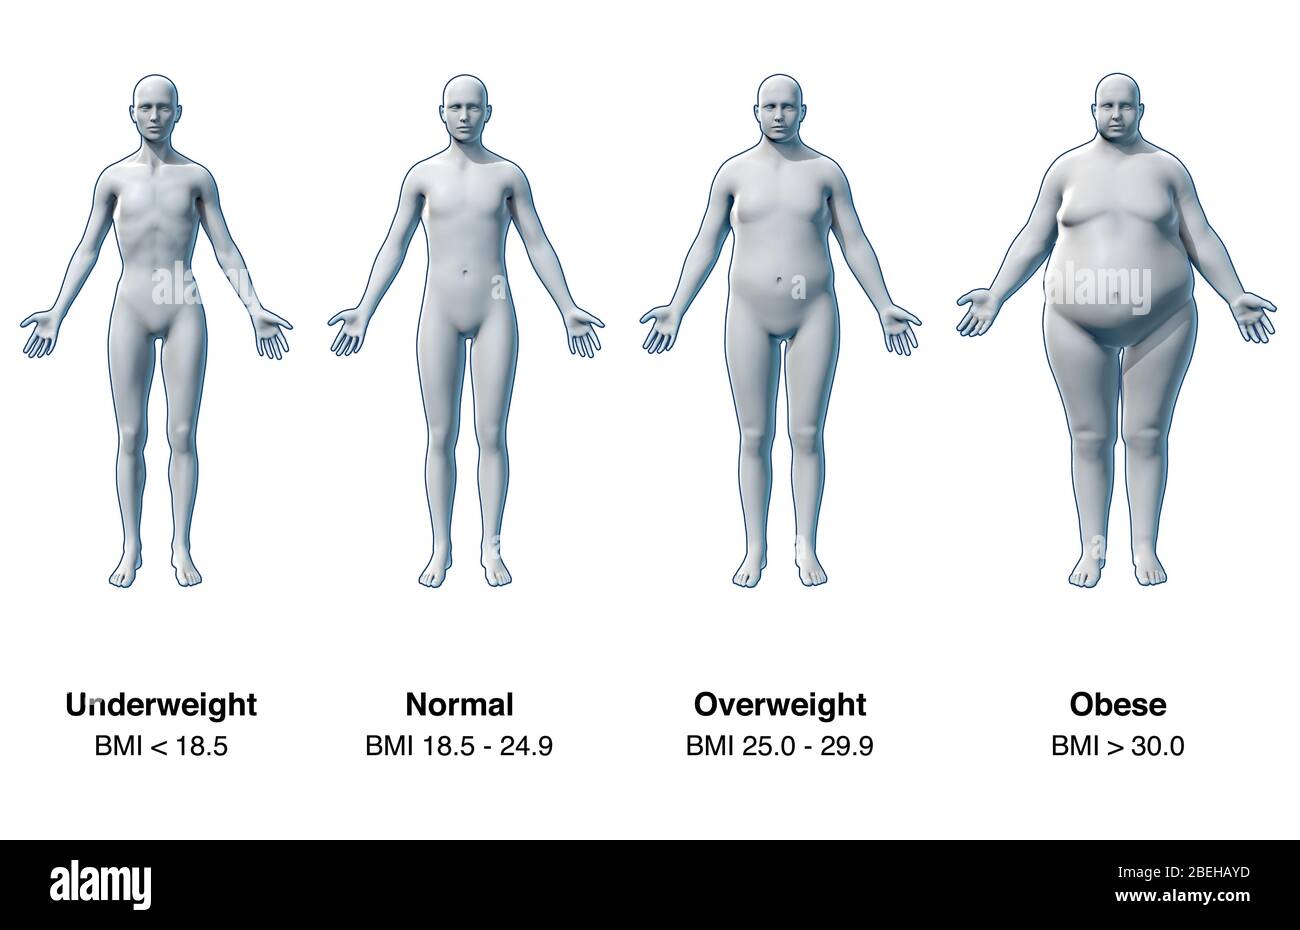 https://c8.alamy.com/comp/2BEHAYD/the-body-mass-index-bmi-is-a-measure-used-to-quantify-tissue-mass-based-on-the-weight-and-height-of-an-individual-the-bmi-was-designed-to-categorize-a-person-as-underweight-normal-weight-overweight-or-obese-in-order-to-determine-possible-health-risks-such-as-malnutrition-or-eating-disorders-however-a-persons-bmi-my-not-accurately-reflect-body-fat-percentage-for-example-professional-athletes-have-a-high-muscle-to-fat-ratio-resulting-in-a-misleadingly-high-bmi-2BEHAYD.jpg